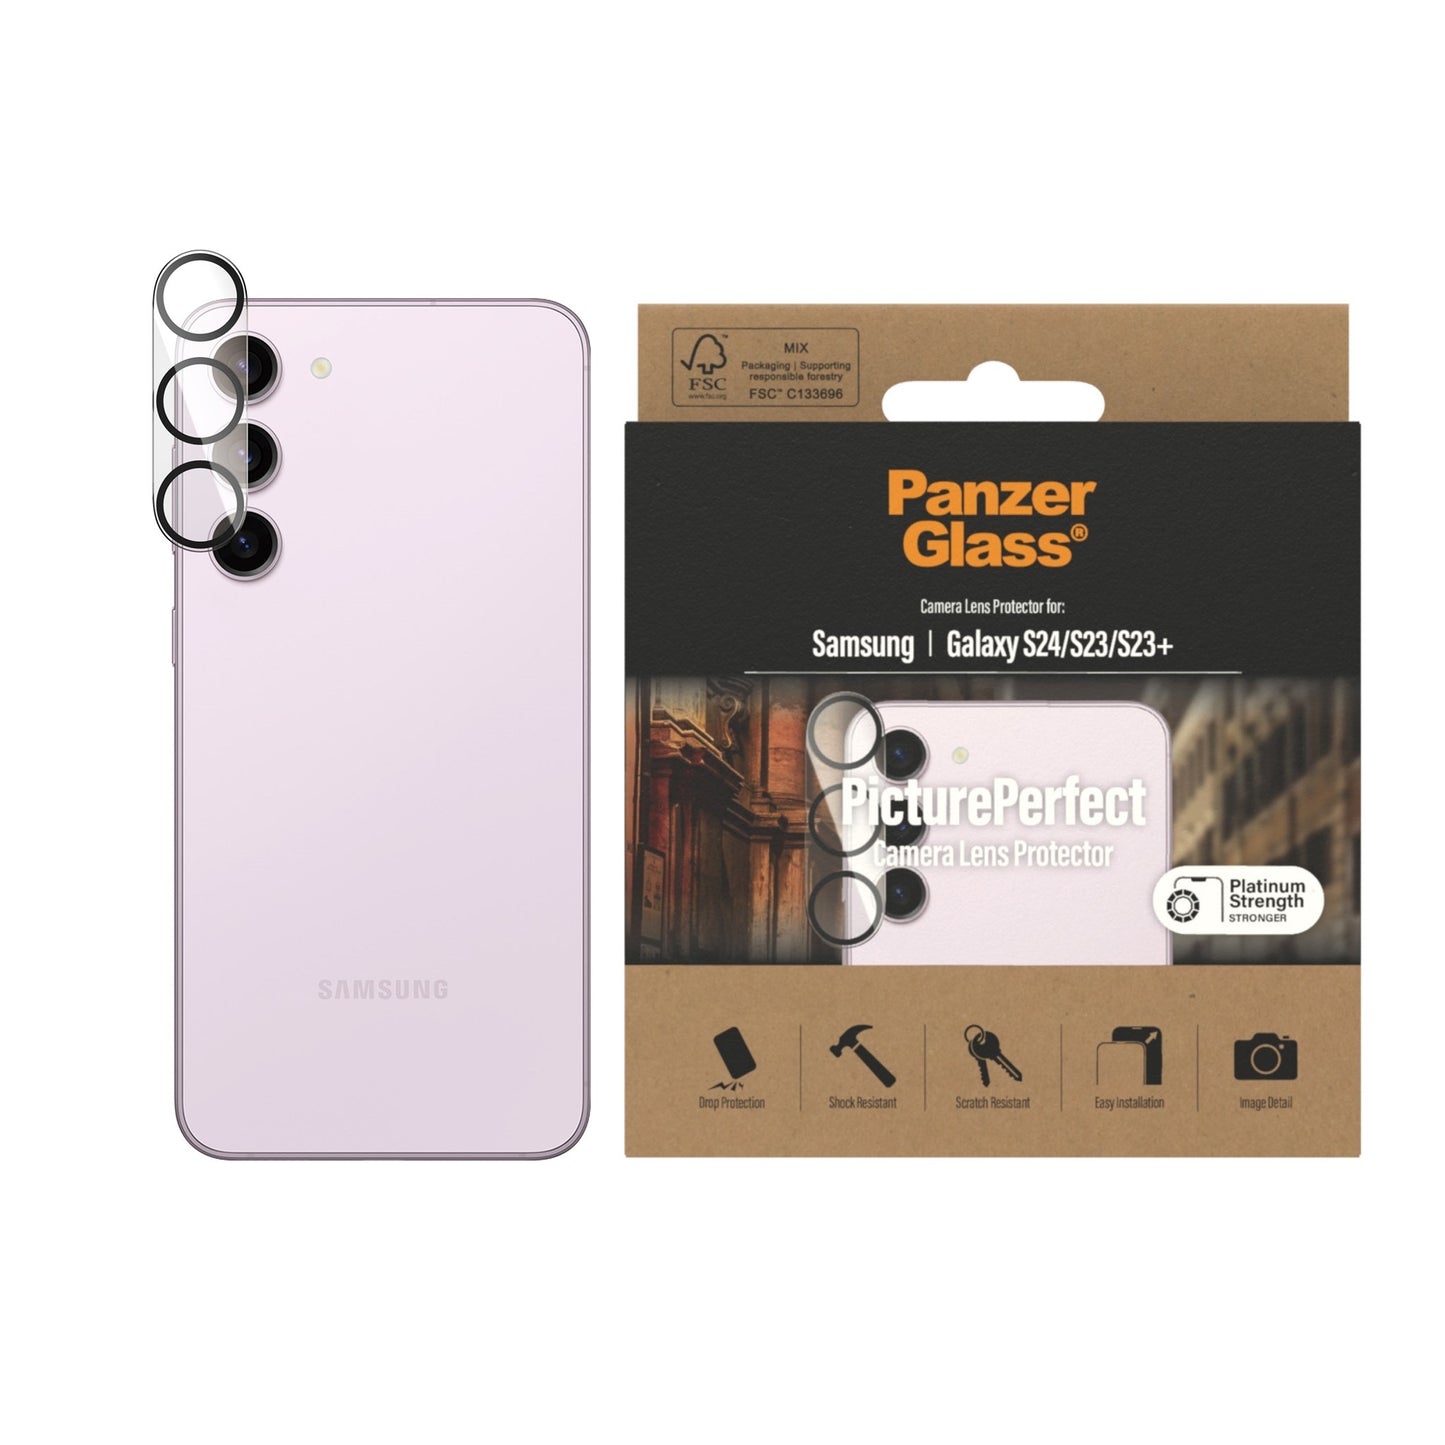 PanzerGlass® PicturePerfect Camera Lens Protector Samsung Galaxy S23 | S23 Plus 2